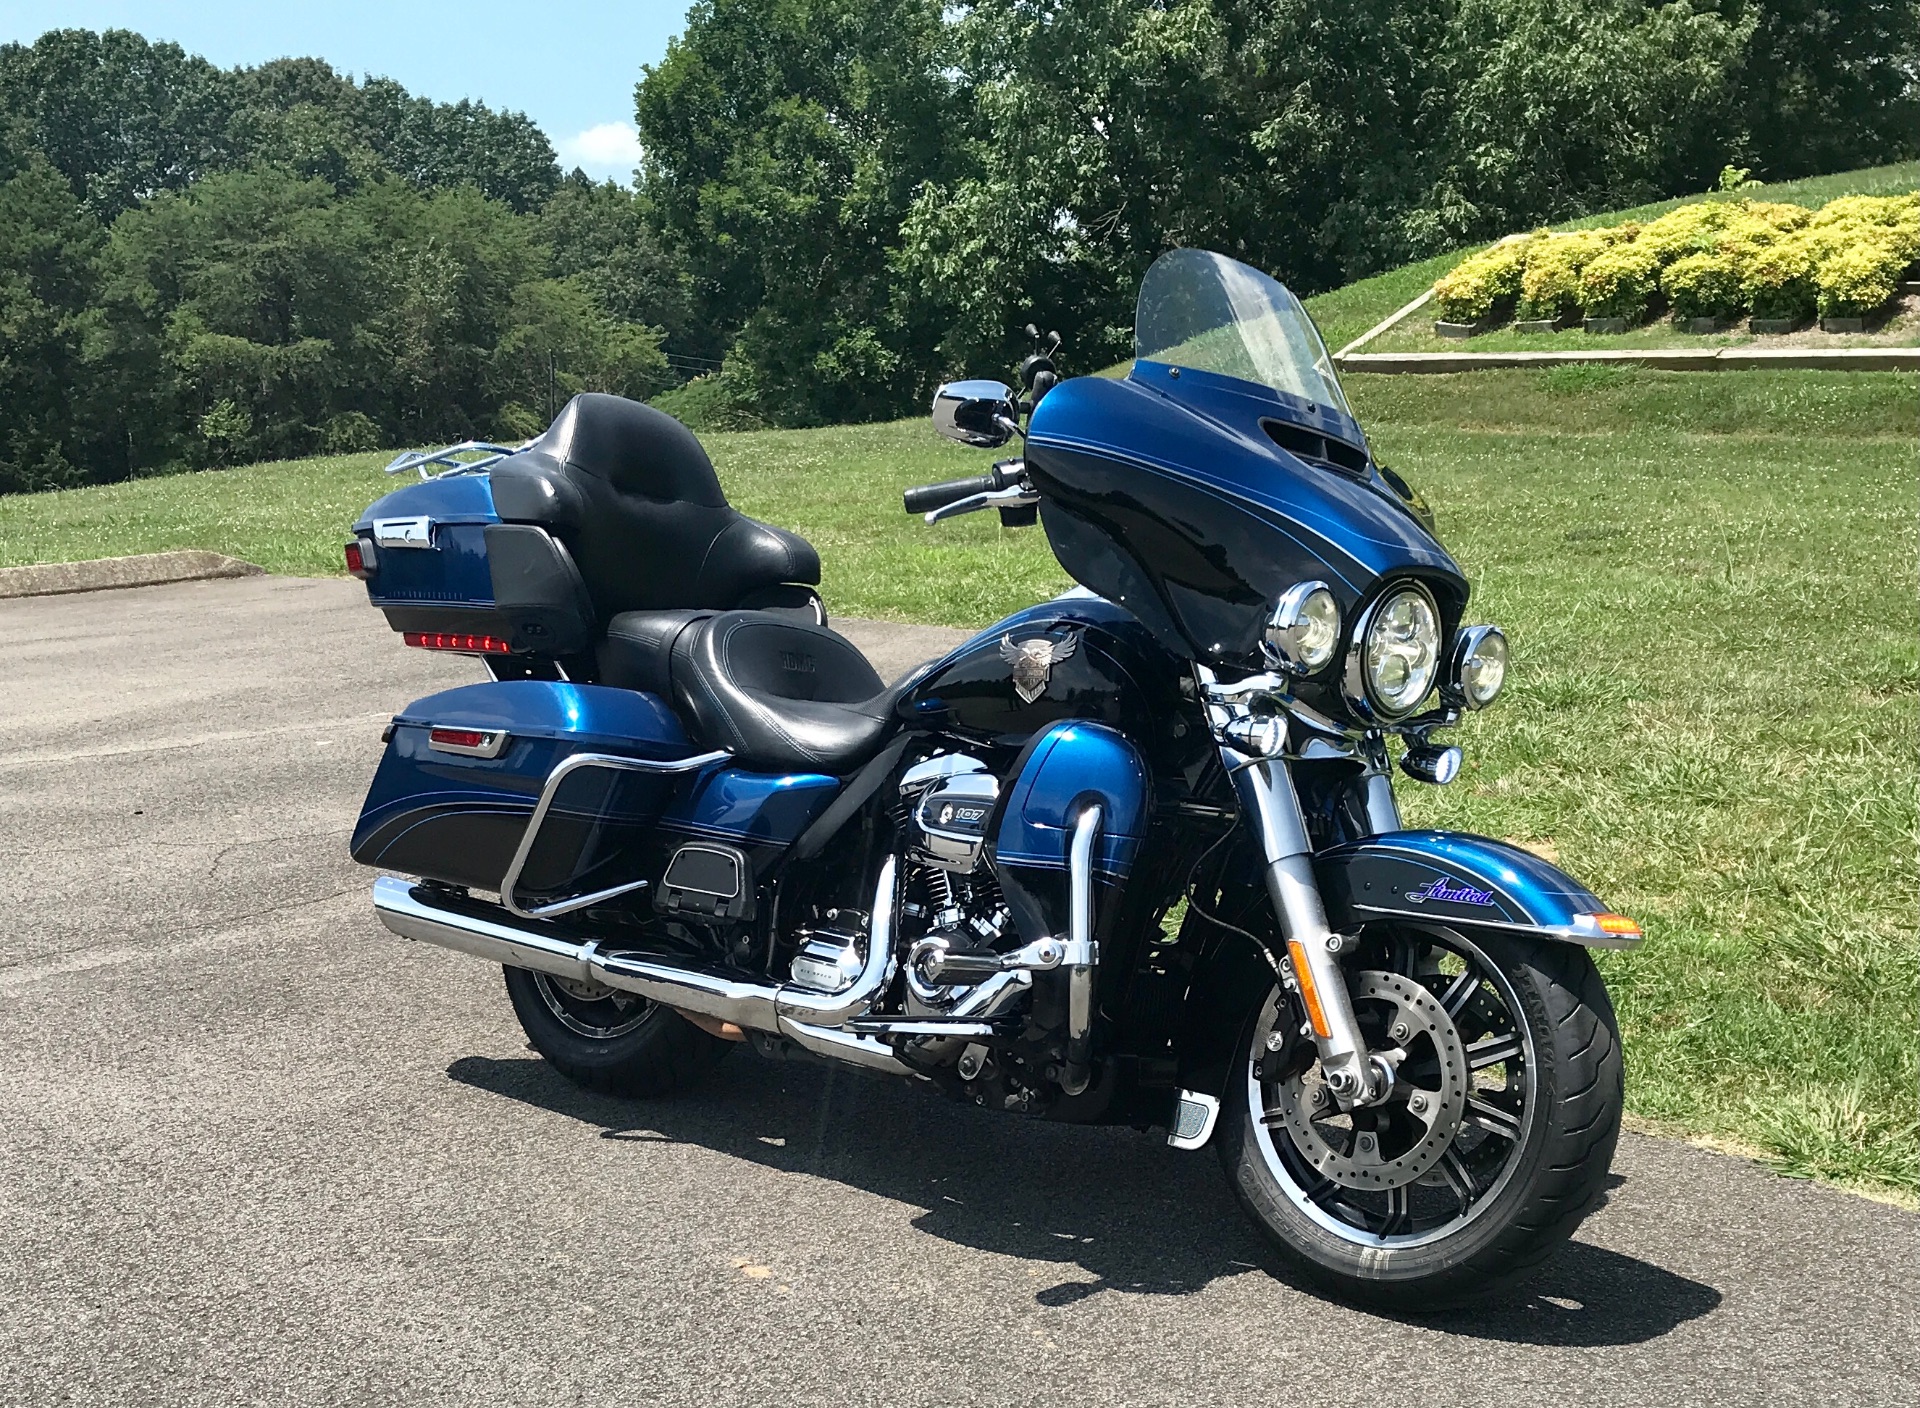 2018 Harley-Davidson Electra Glide Ultra Limited in Morristown, Tennessee - Photo 2